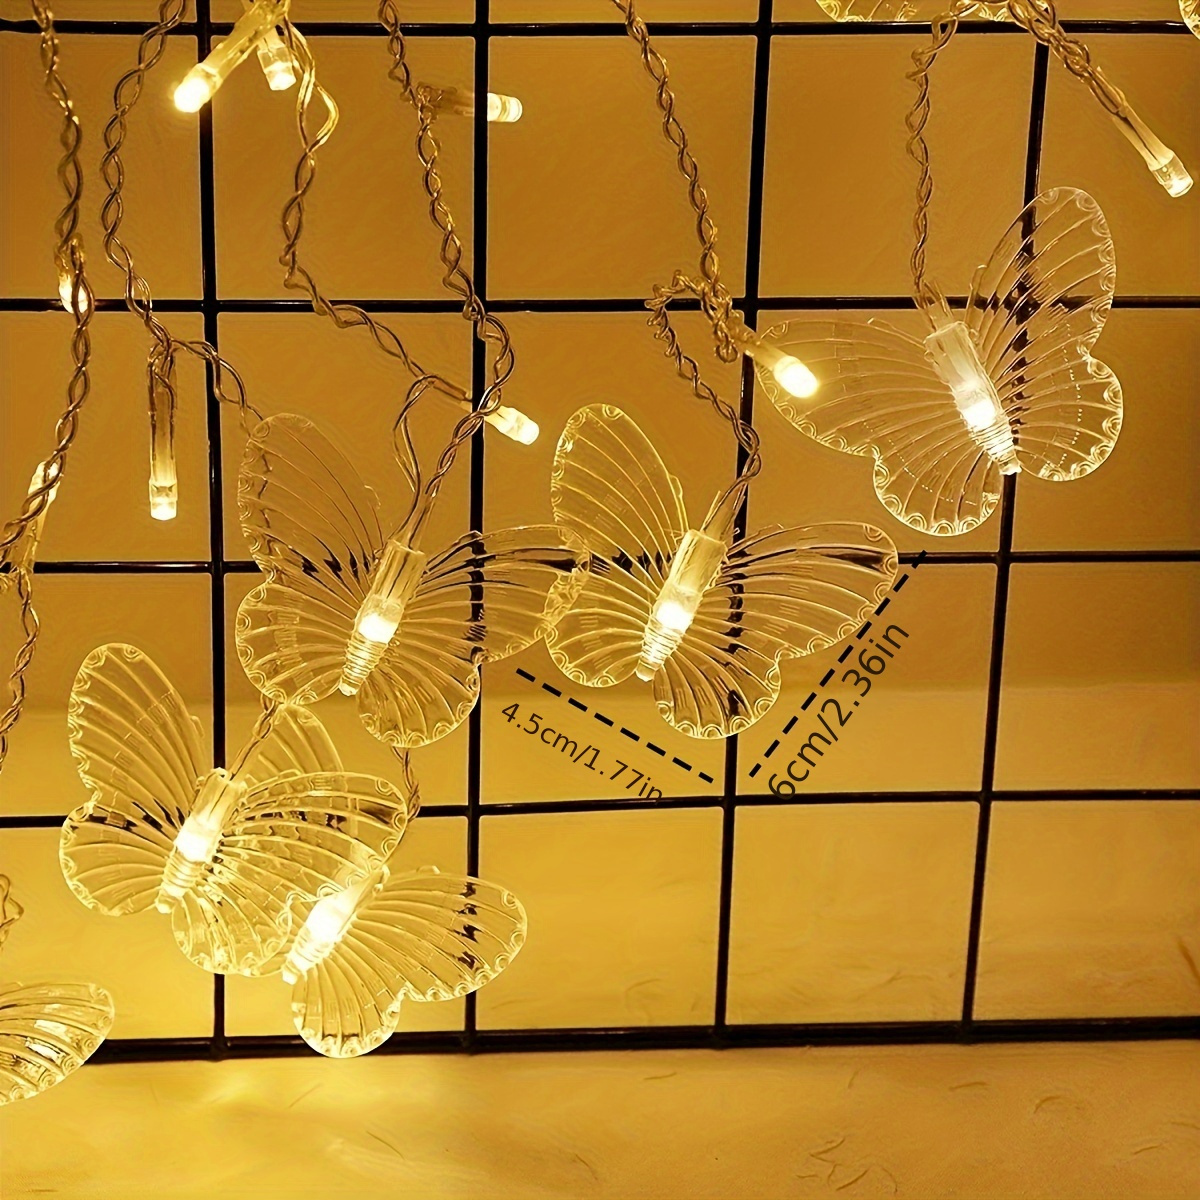 1pack solar curtain butterfly string lights 48 led butterfly lights for bedroom 10 butterflies 8 modes fairy lights room patio party wedding holiday mothers day gifts